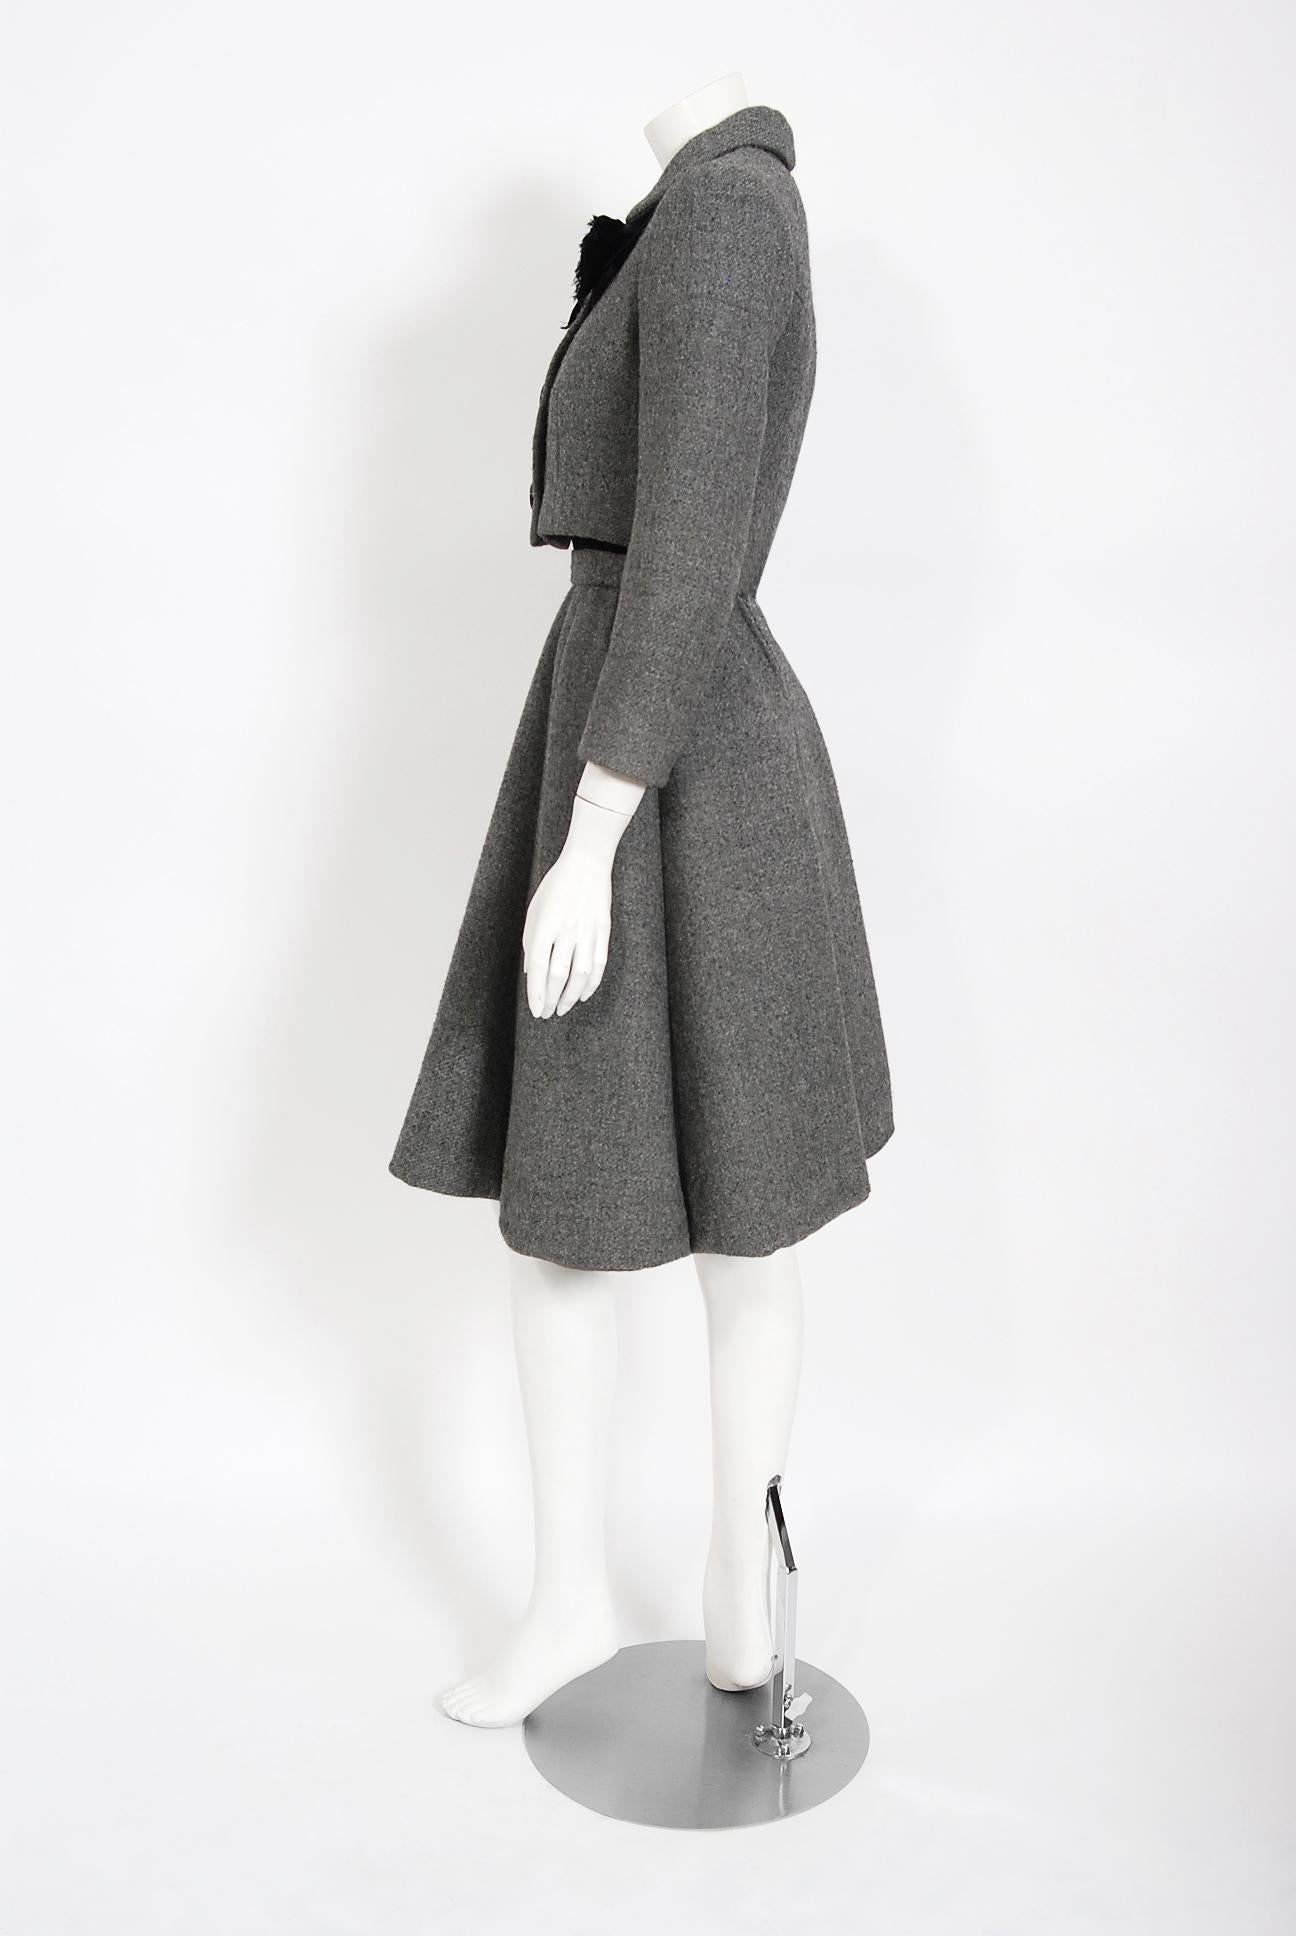 Vintage 1964 Norman Norell Documented Gray Wool Dress w/ Double-Breasted Jacket 2